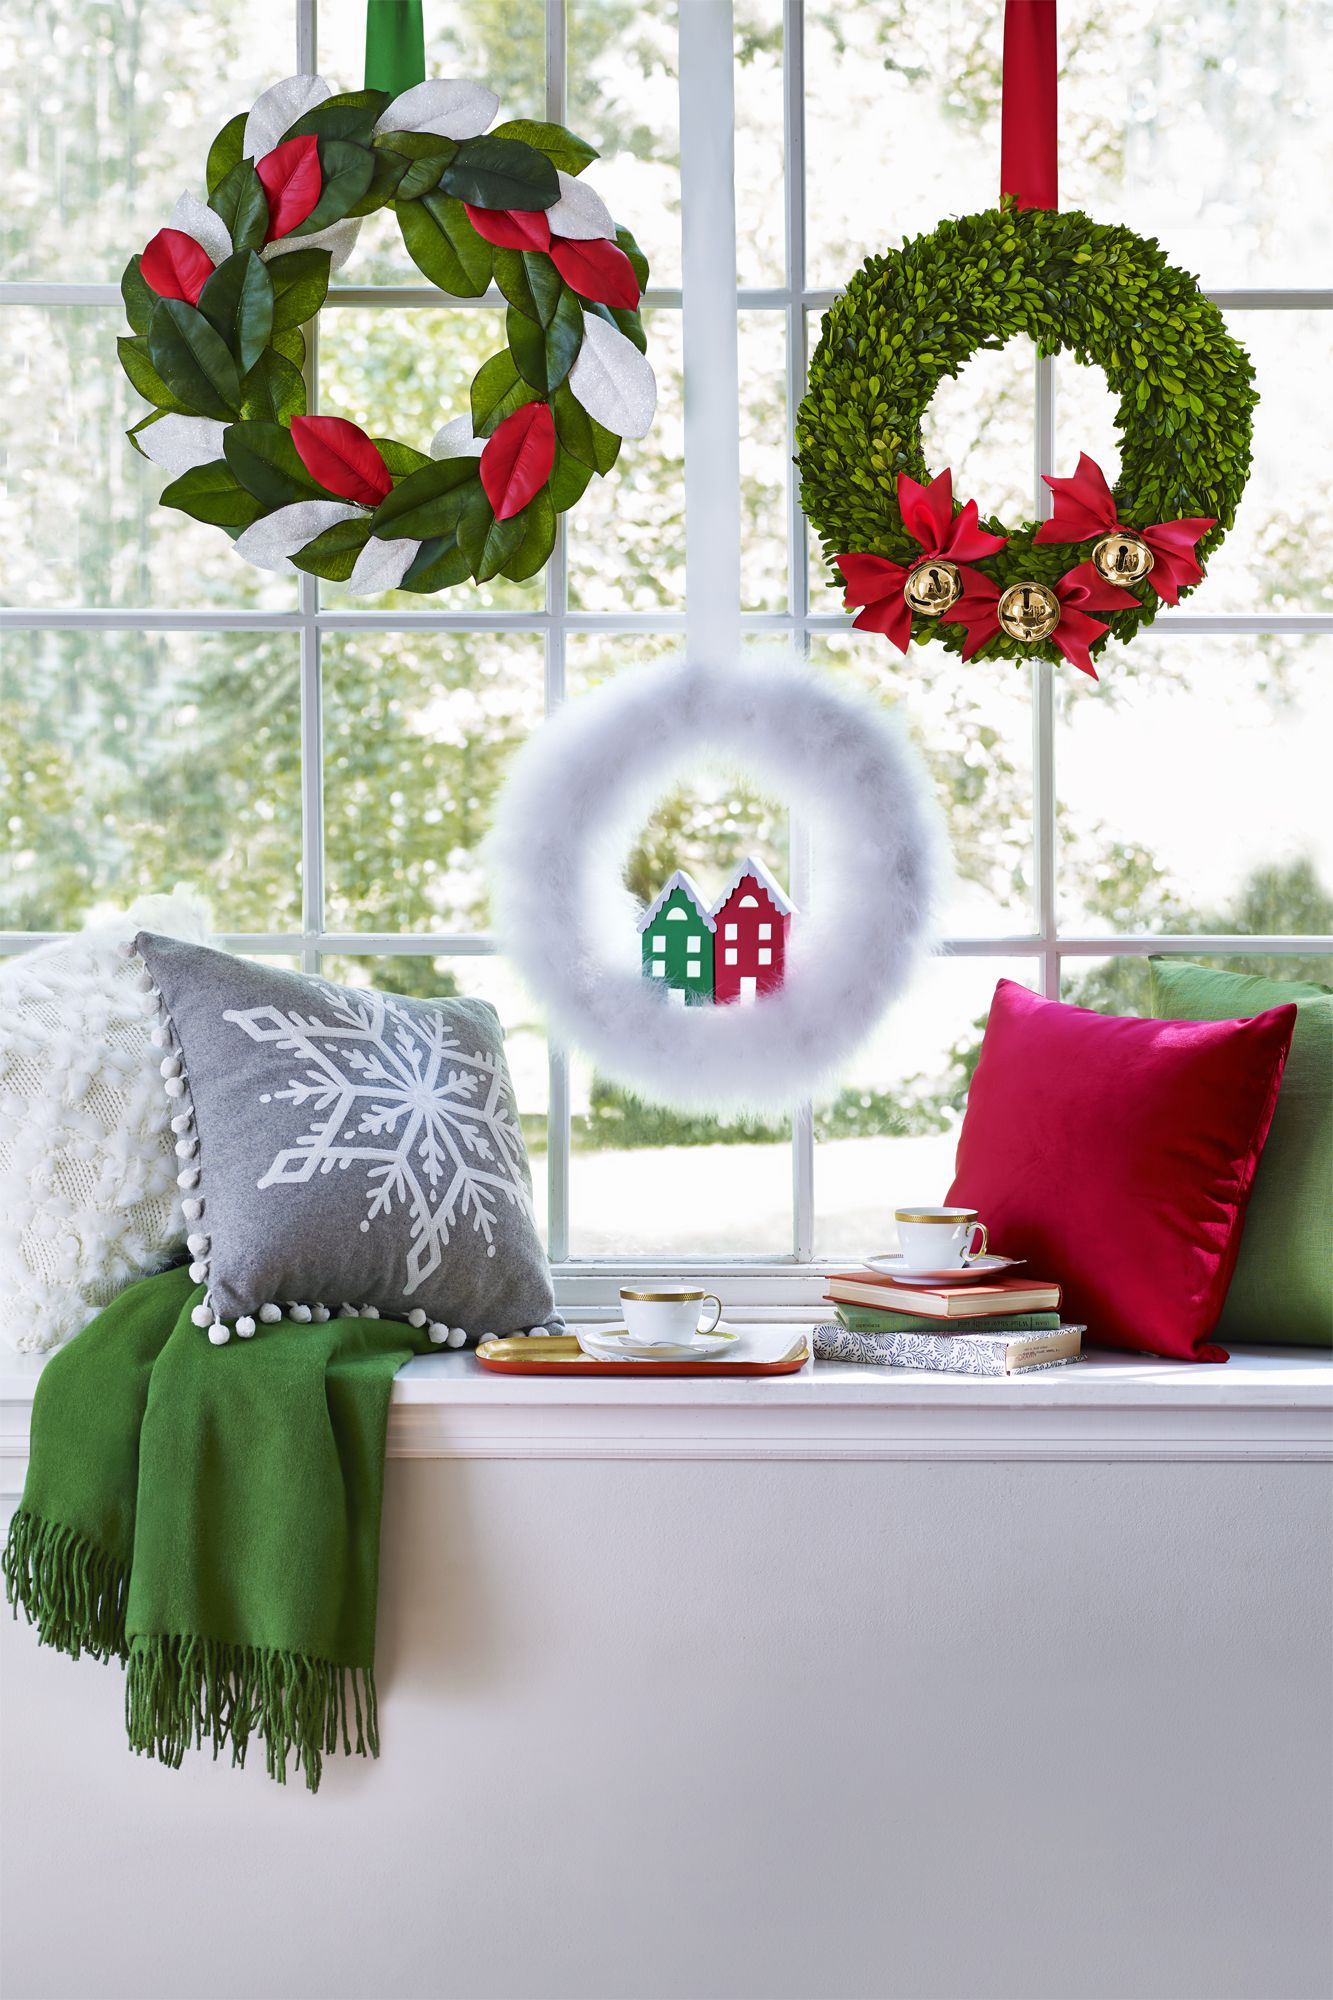 47 Easy DIY Christmas Decorations - Homemade Ideas for Holiday ...